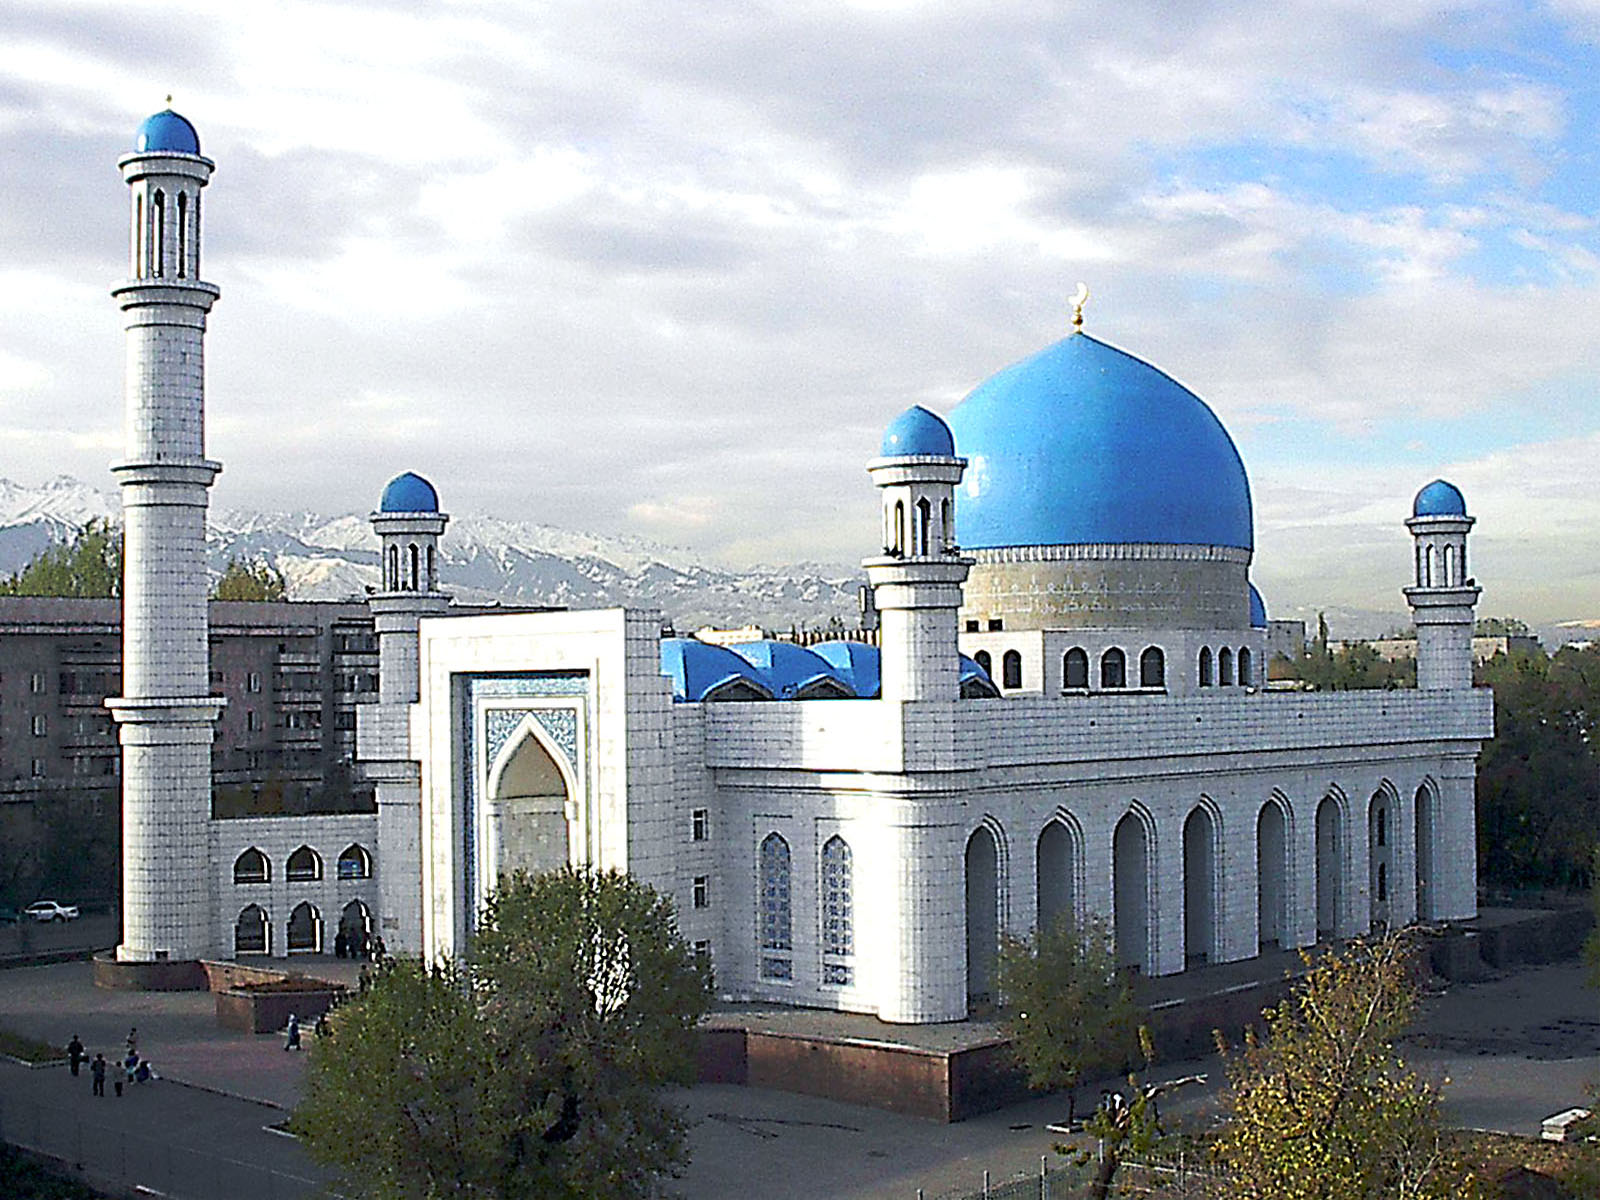 https://www.yizuo-media.com/albums/albums/userpics/10003/Central_Mosque_of_Almaty.jpg